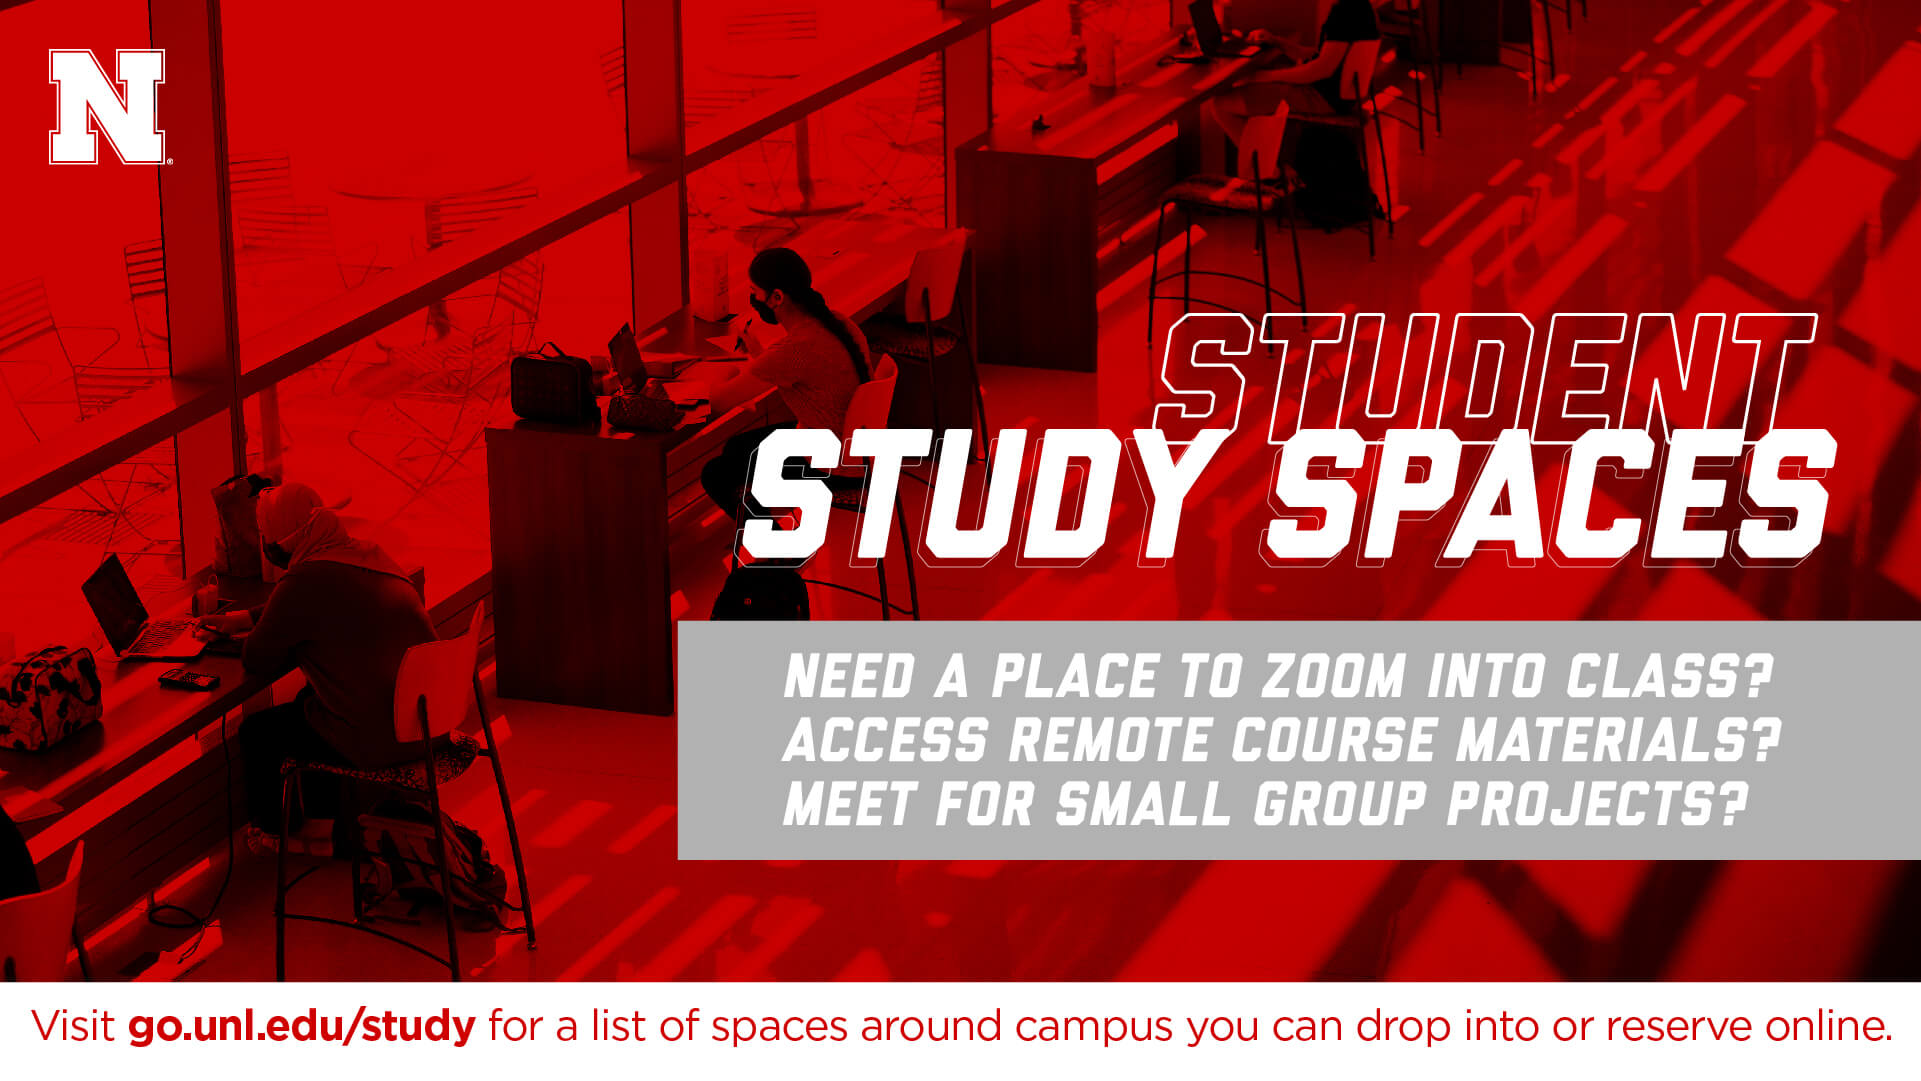 Visit https://go.unl.edu/study for a list of spaces around campus you can drop into or reserve online.